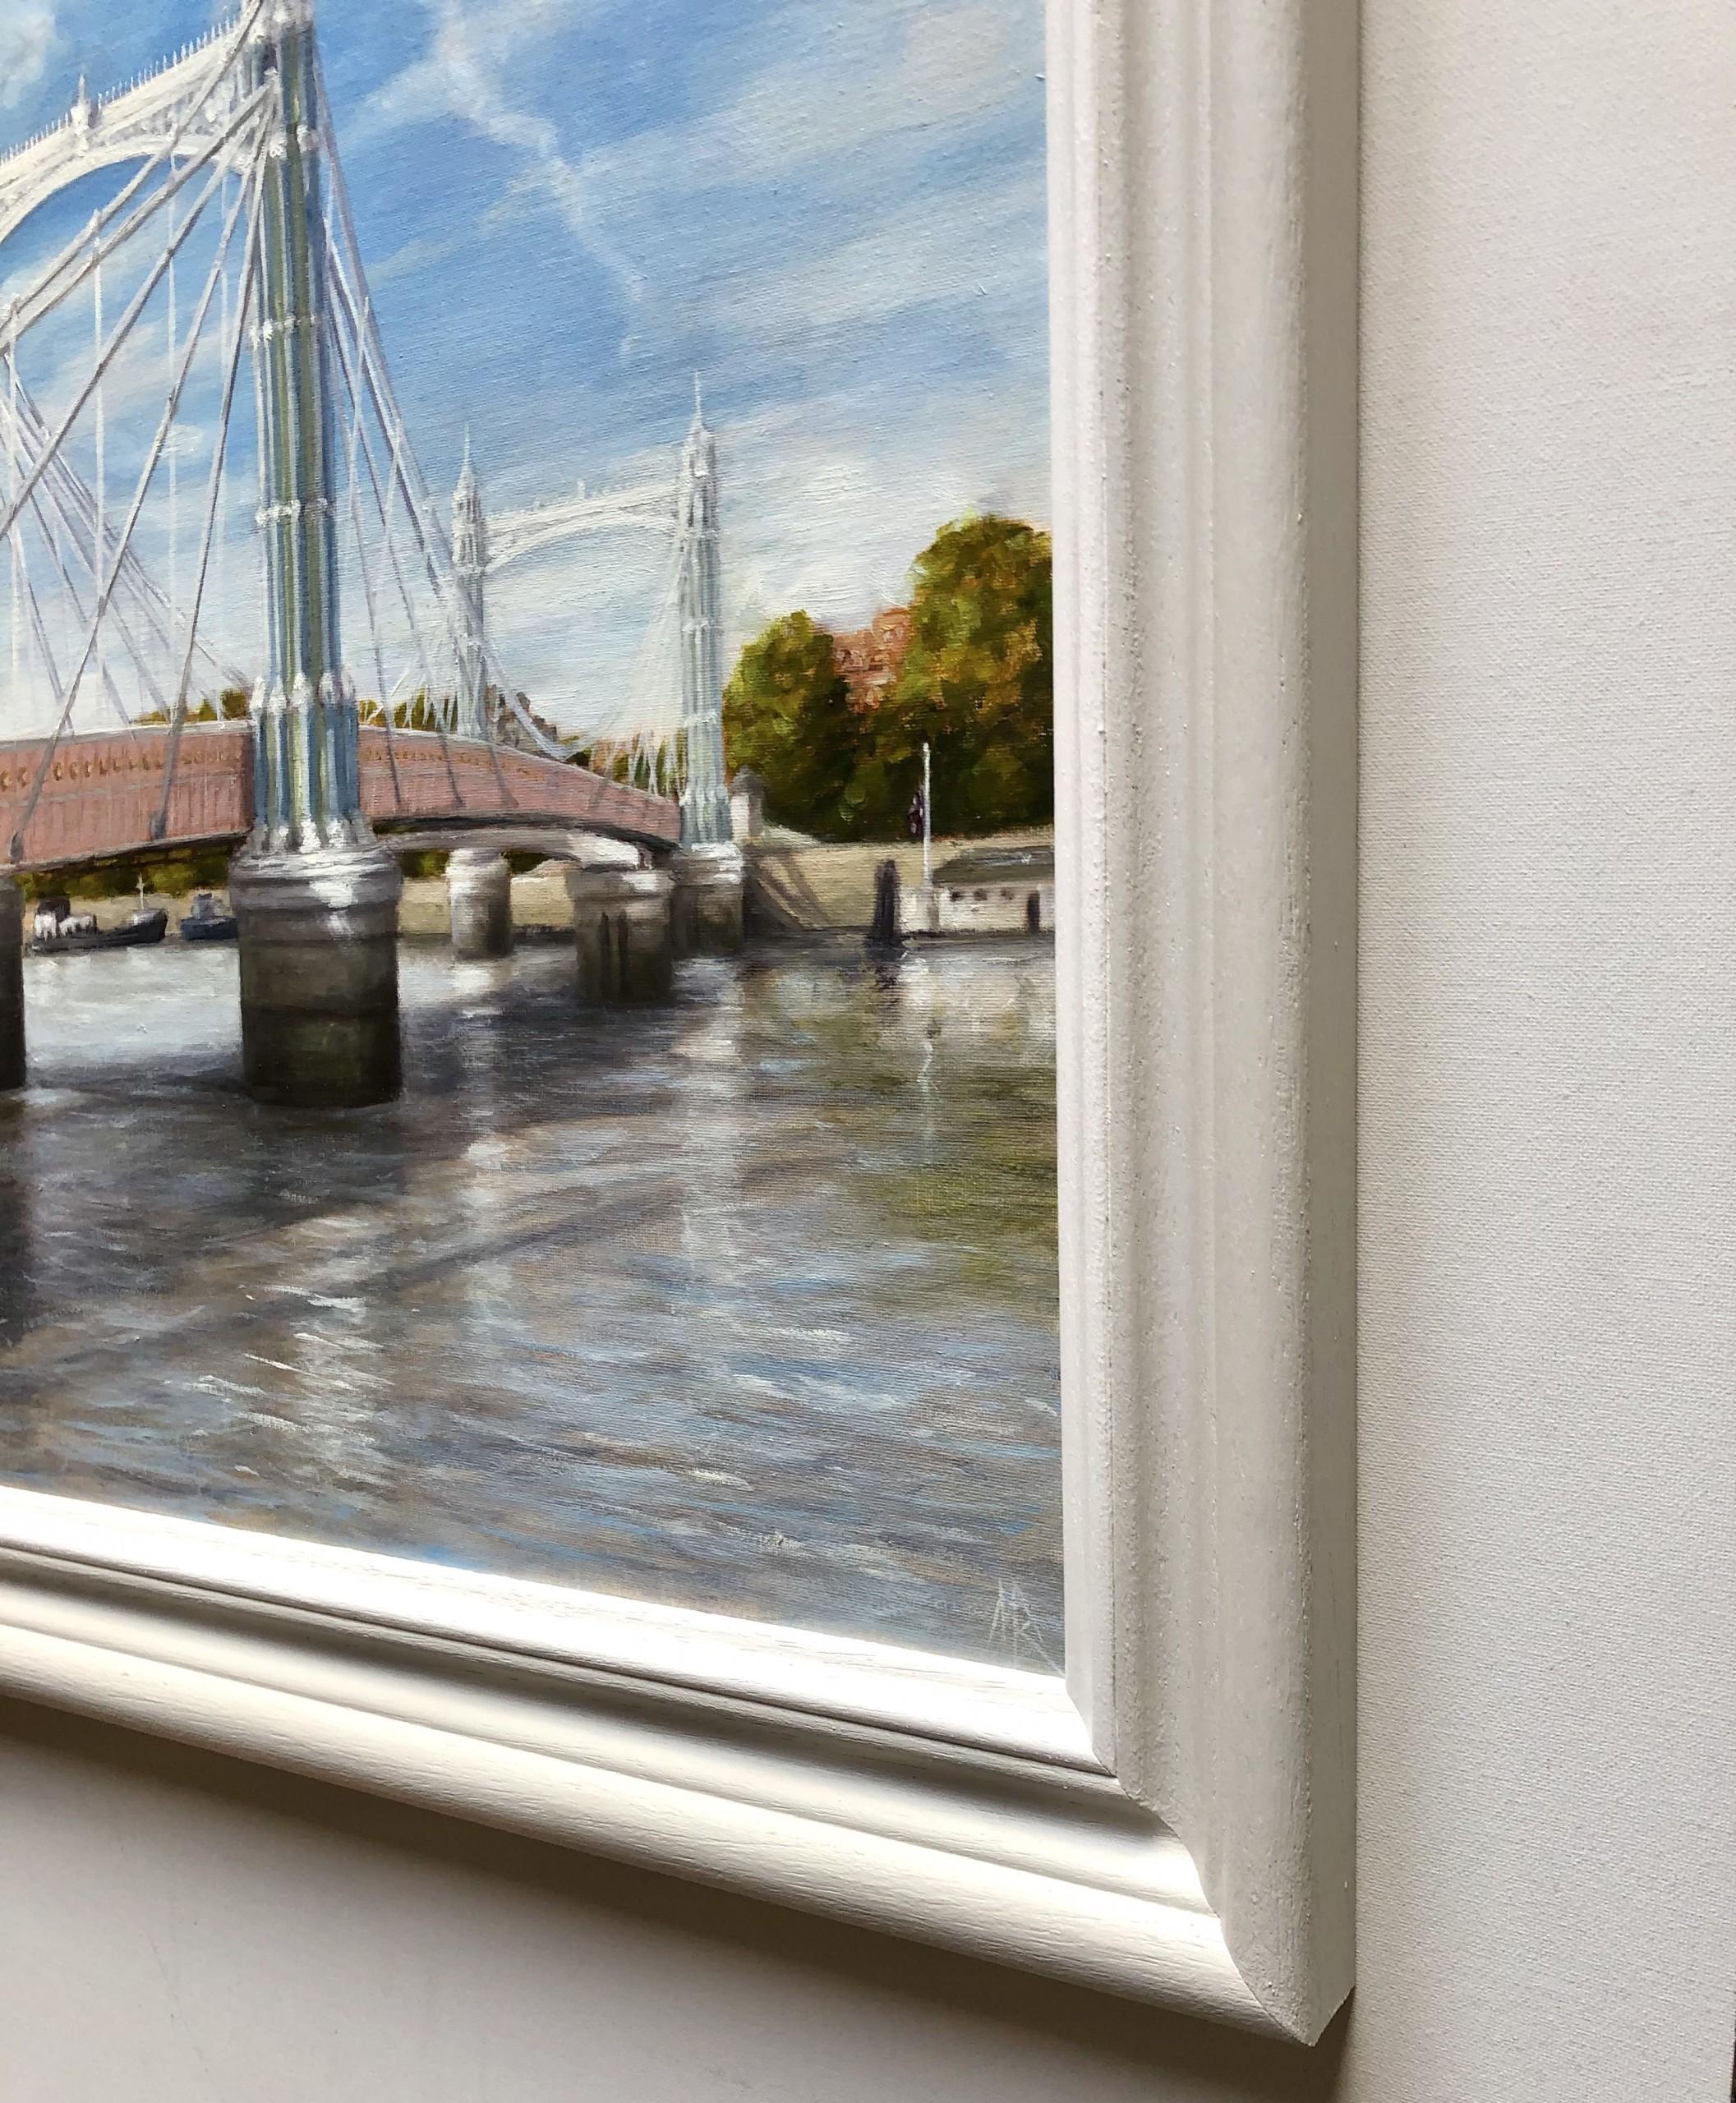 Albert Bridge, Incoming Tide by Marie Robinson [2022]

Marie Robinson’s Albert Bridge, Incoming Tide is an original urban landscape painting of the iconic Albert Bridge spanning the river Thames in London on a warm, sunny September afternoon. Marie